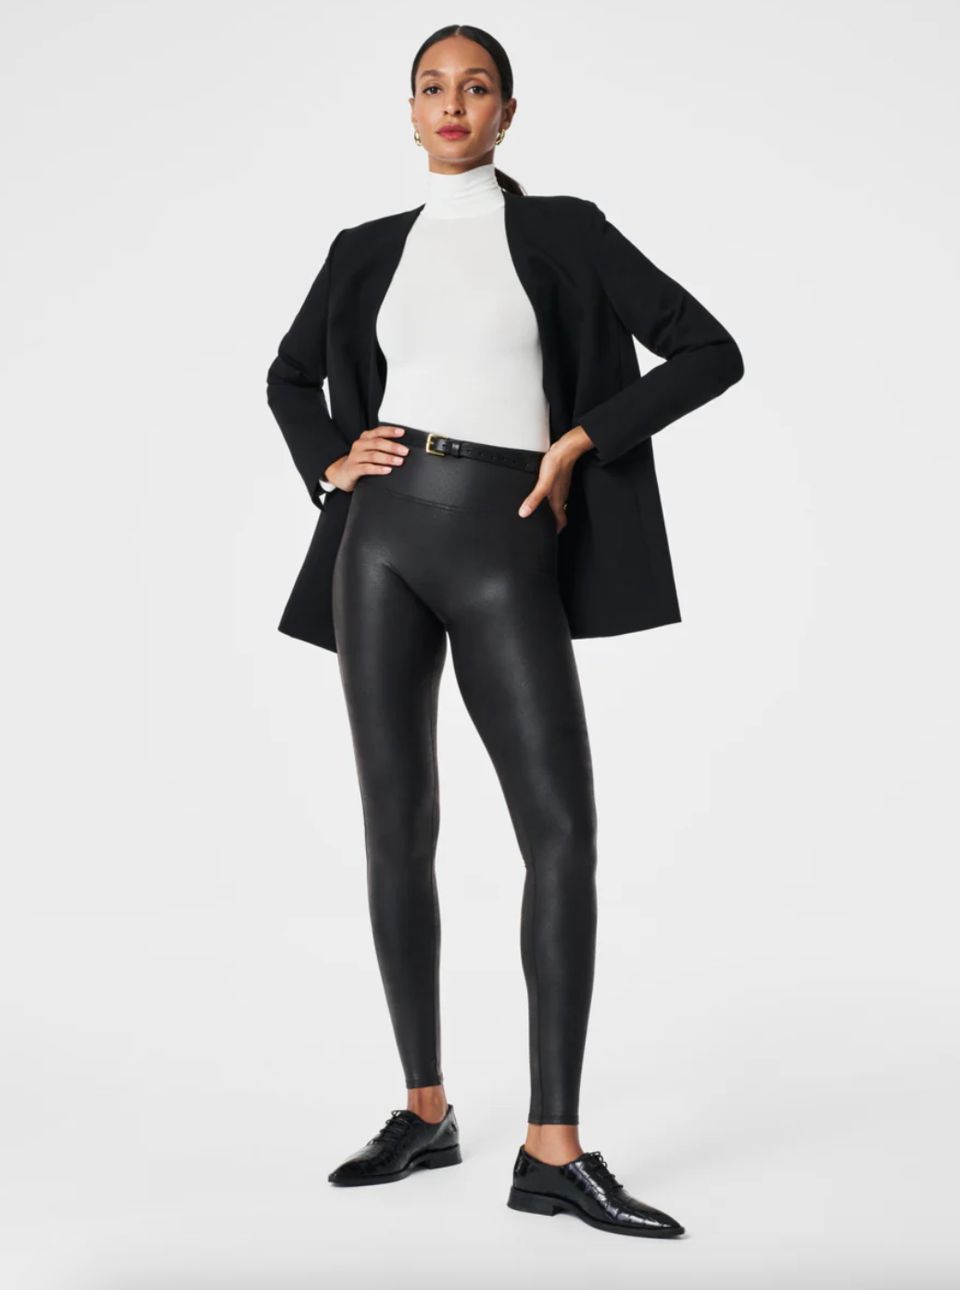 A pair of Spanx faux leather leggings to embrace your inner rockstar